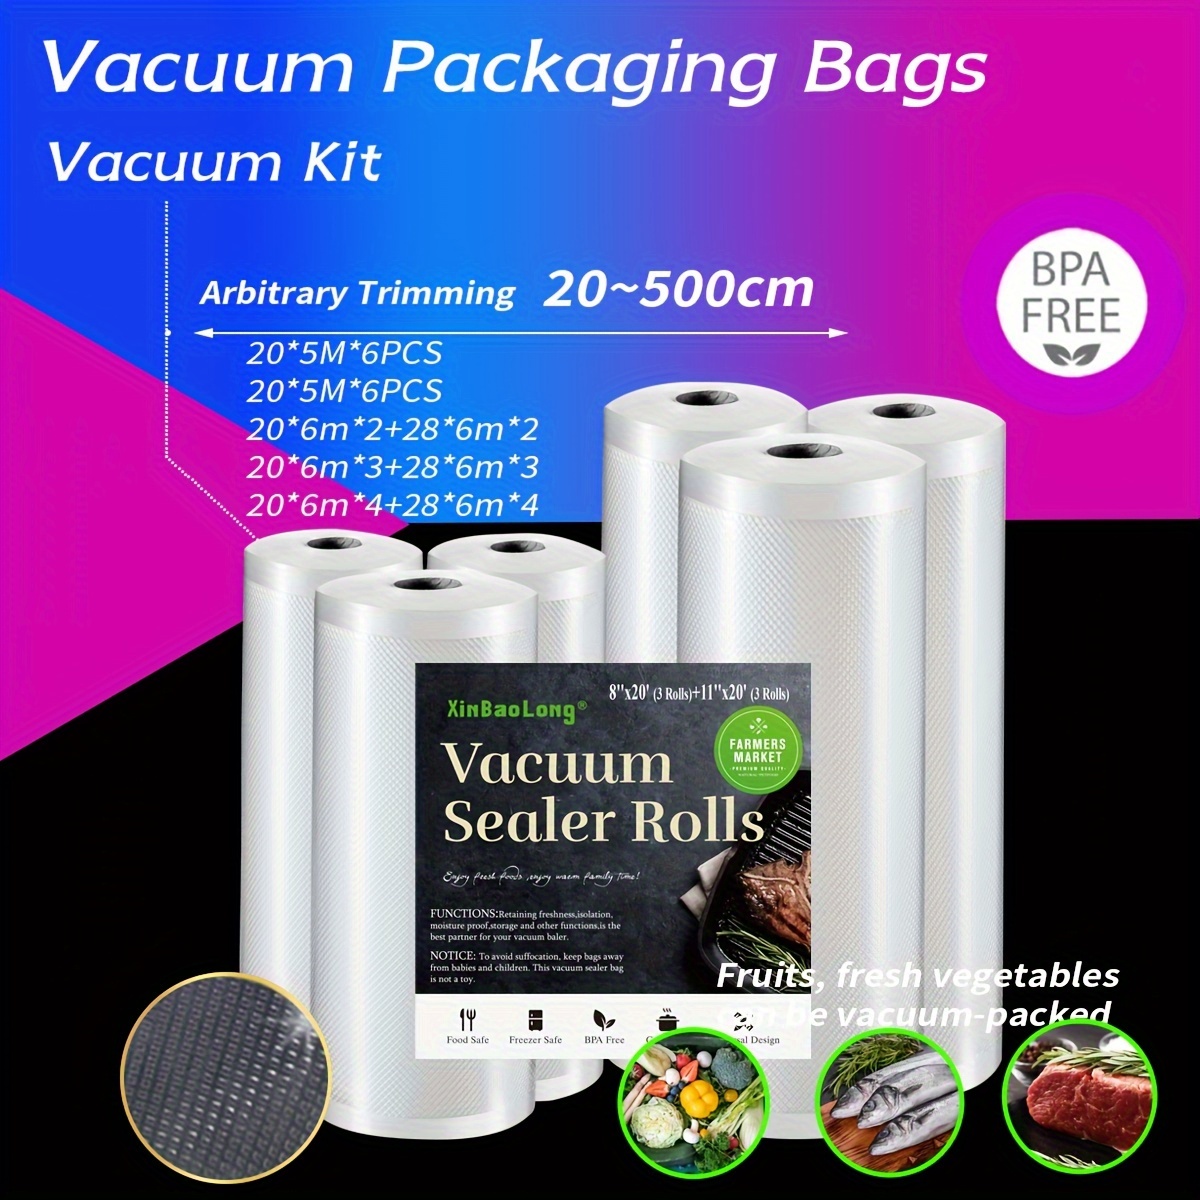 

4/6/8pcs Vacuum Sealed Roll Bag, Using Durable Food Grade Vacuum Sealed Pockets, Kitchen Supplies, To Keep Your Food Fresh For A Longer Time